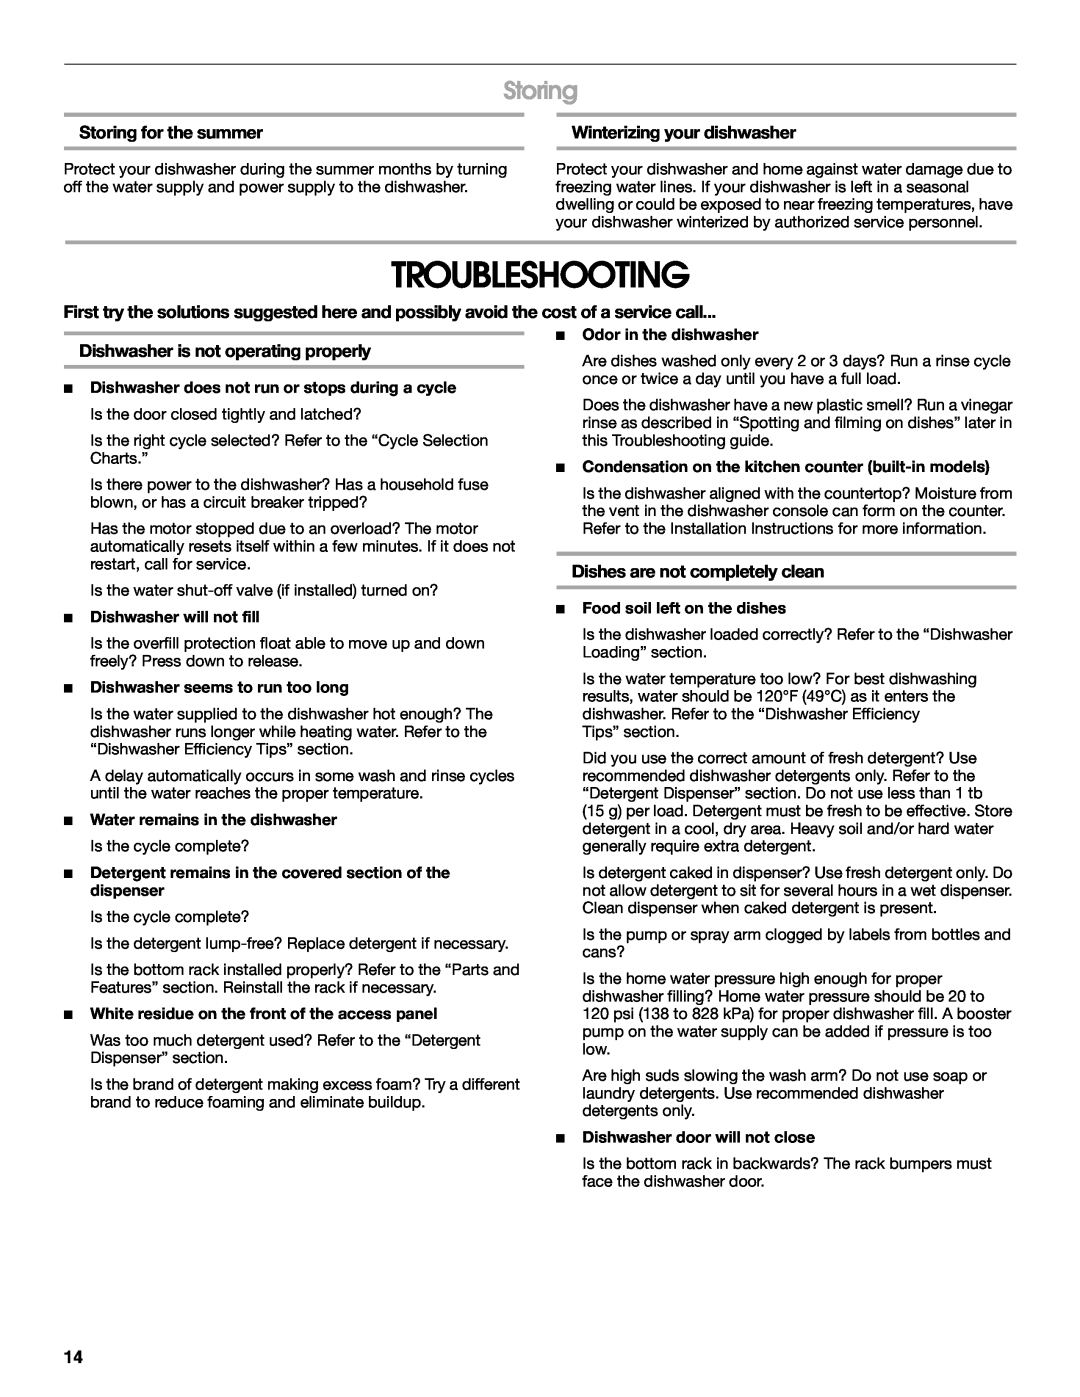 Whirlpool TUD6900 manual Troubleshooting, Storing for the summer, Winterizing your dishwasher, Dishwasher will not fill 